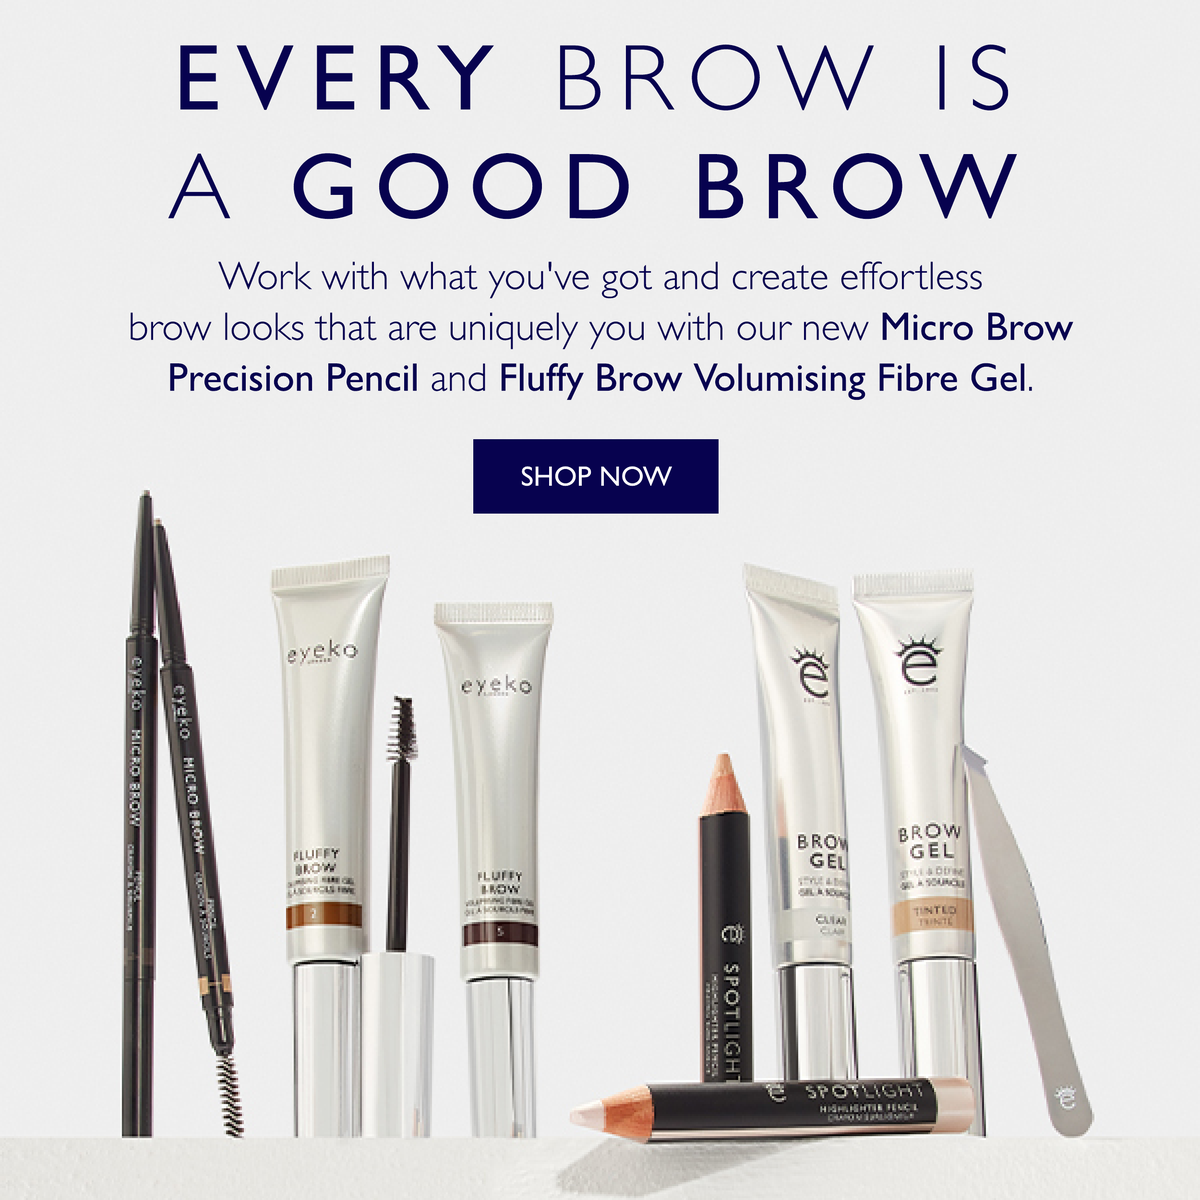 Every brow is a good brow. Shop our new Micro Brow Precision Pencil and Fluffy Brow Volumising Fibre Gel